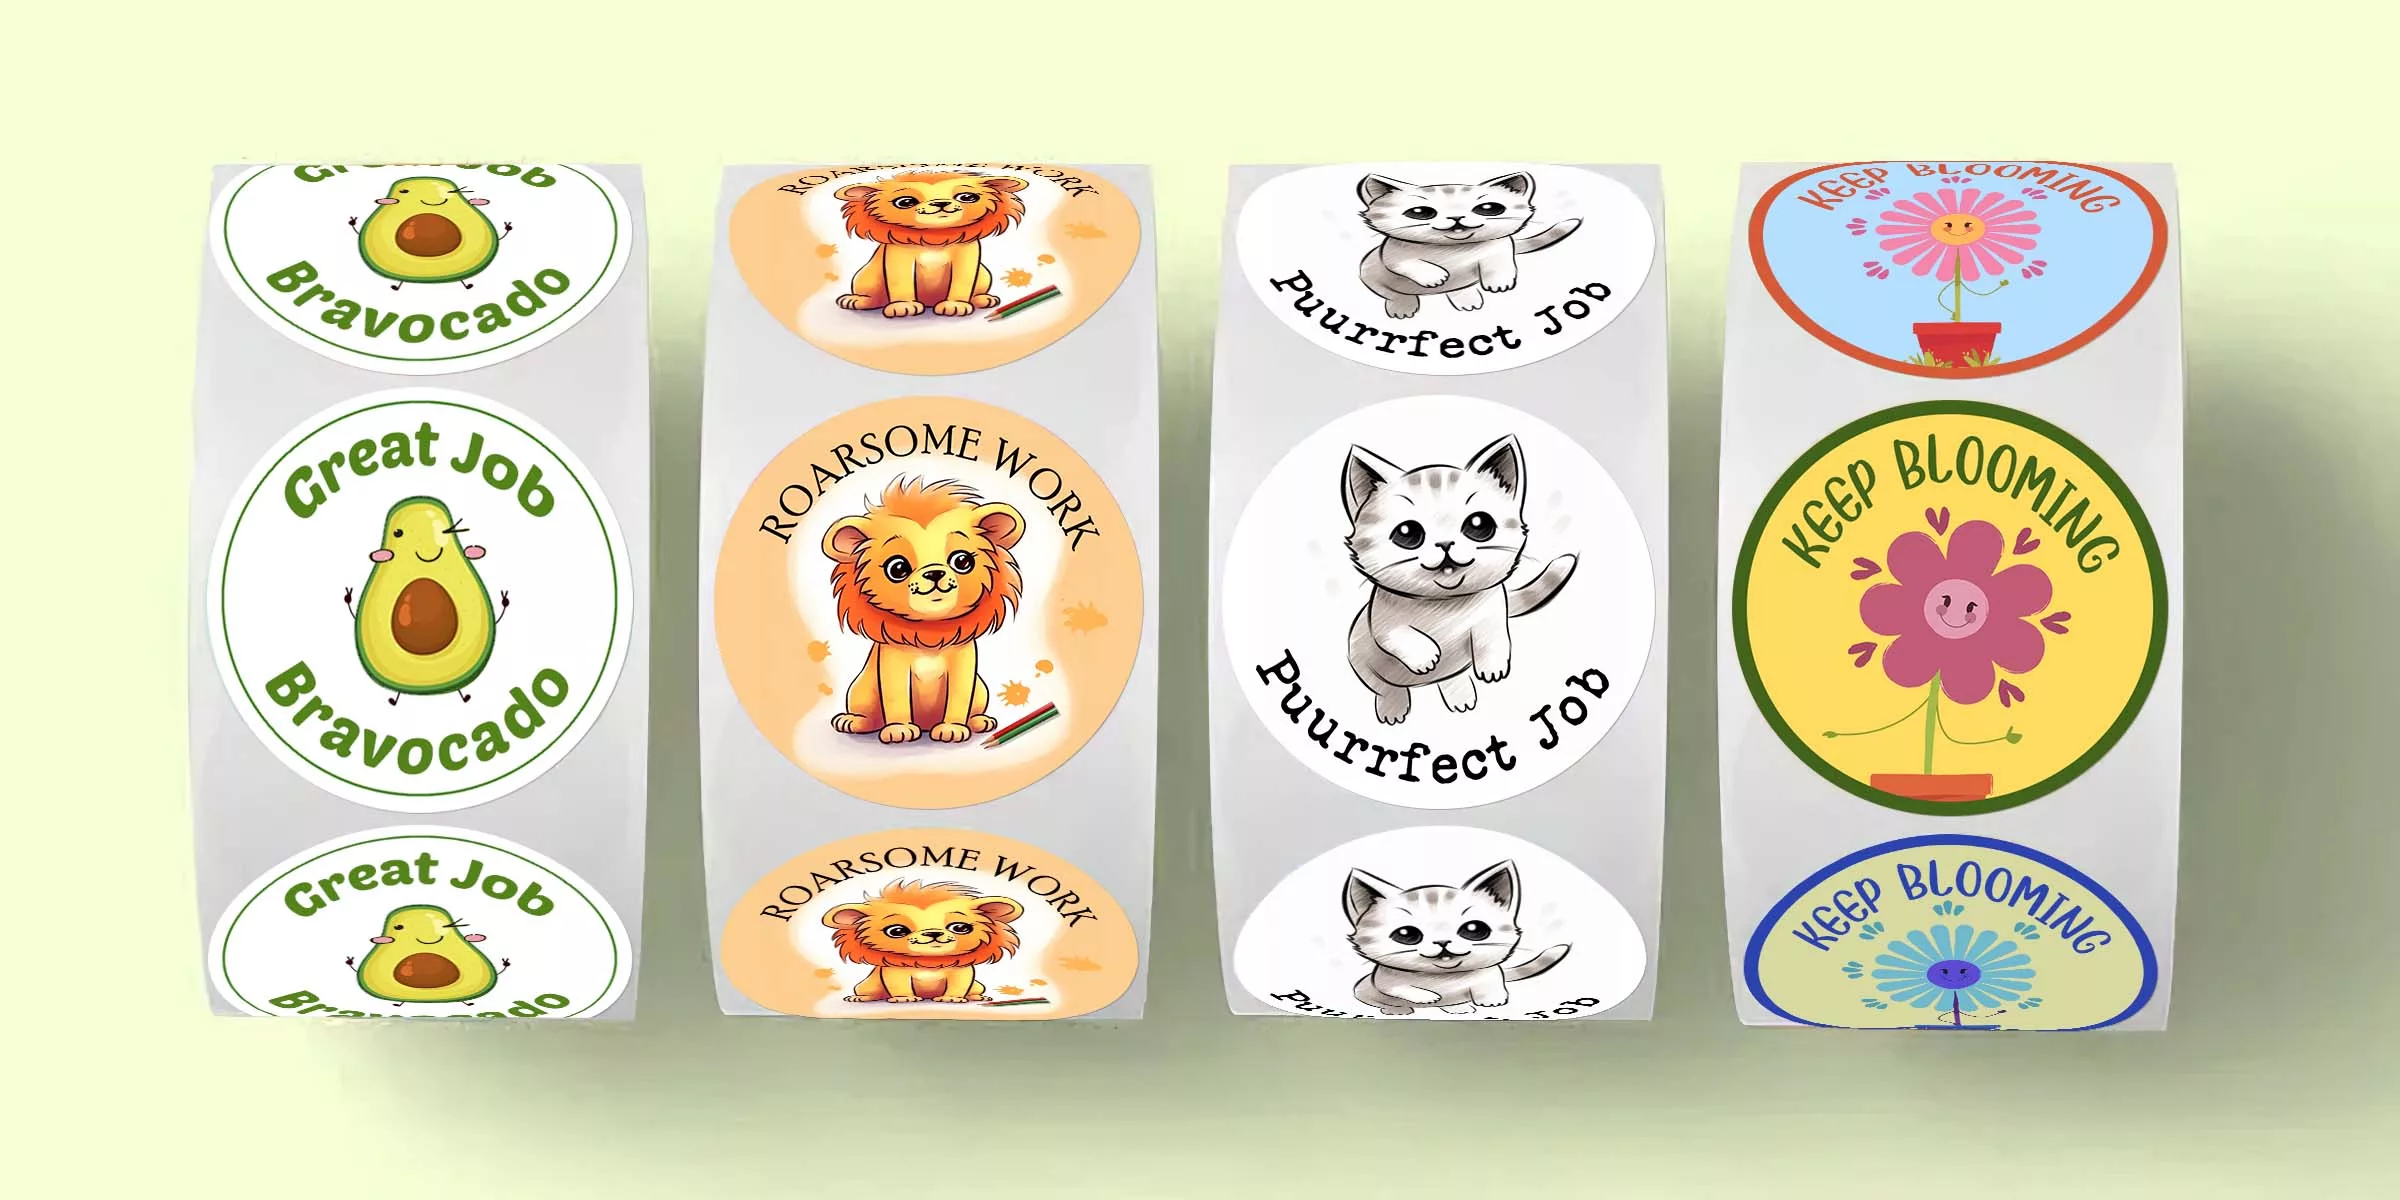 Reward stickers How to excite and engage children's learning